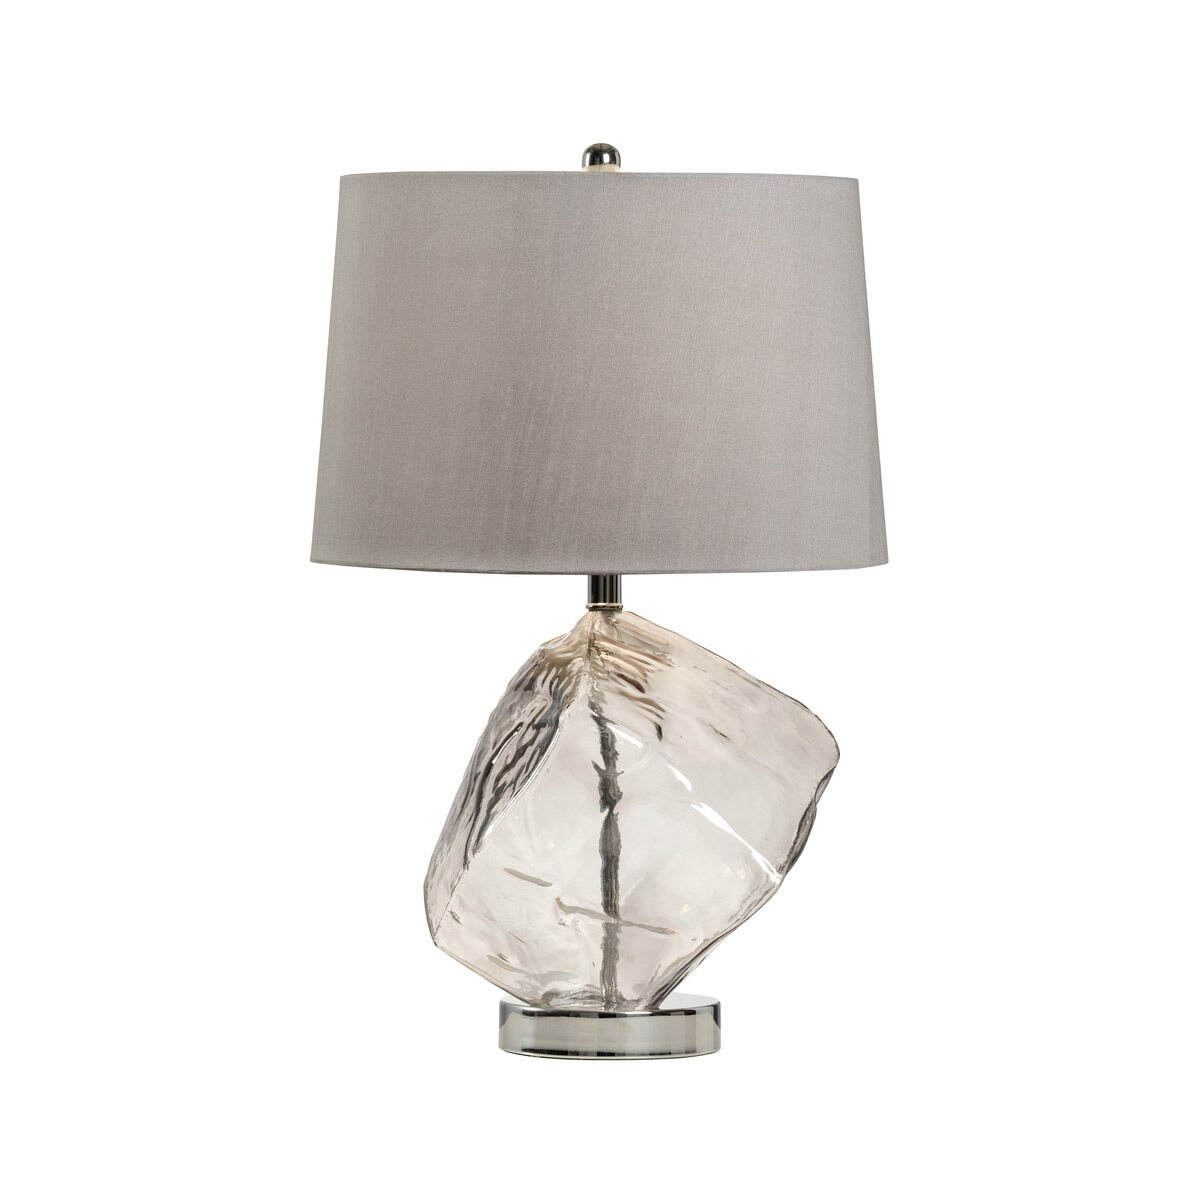 MarketPlace Table Lamp